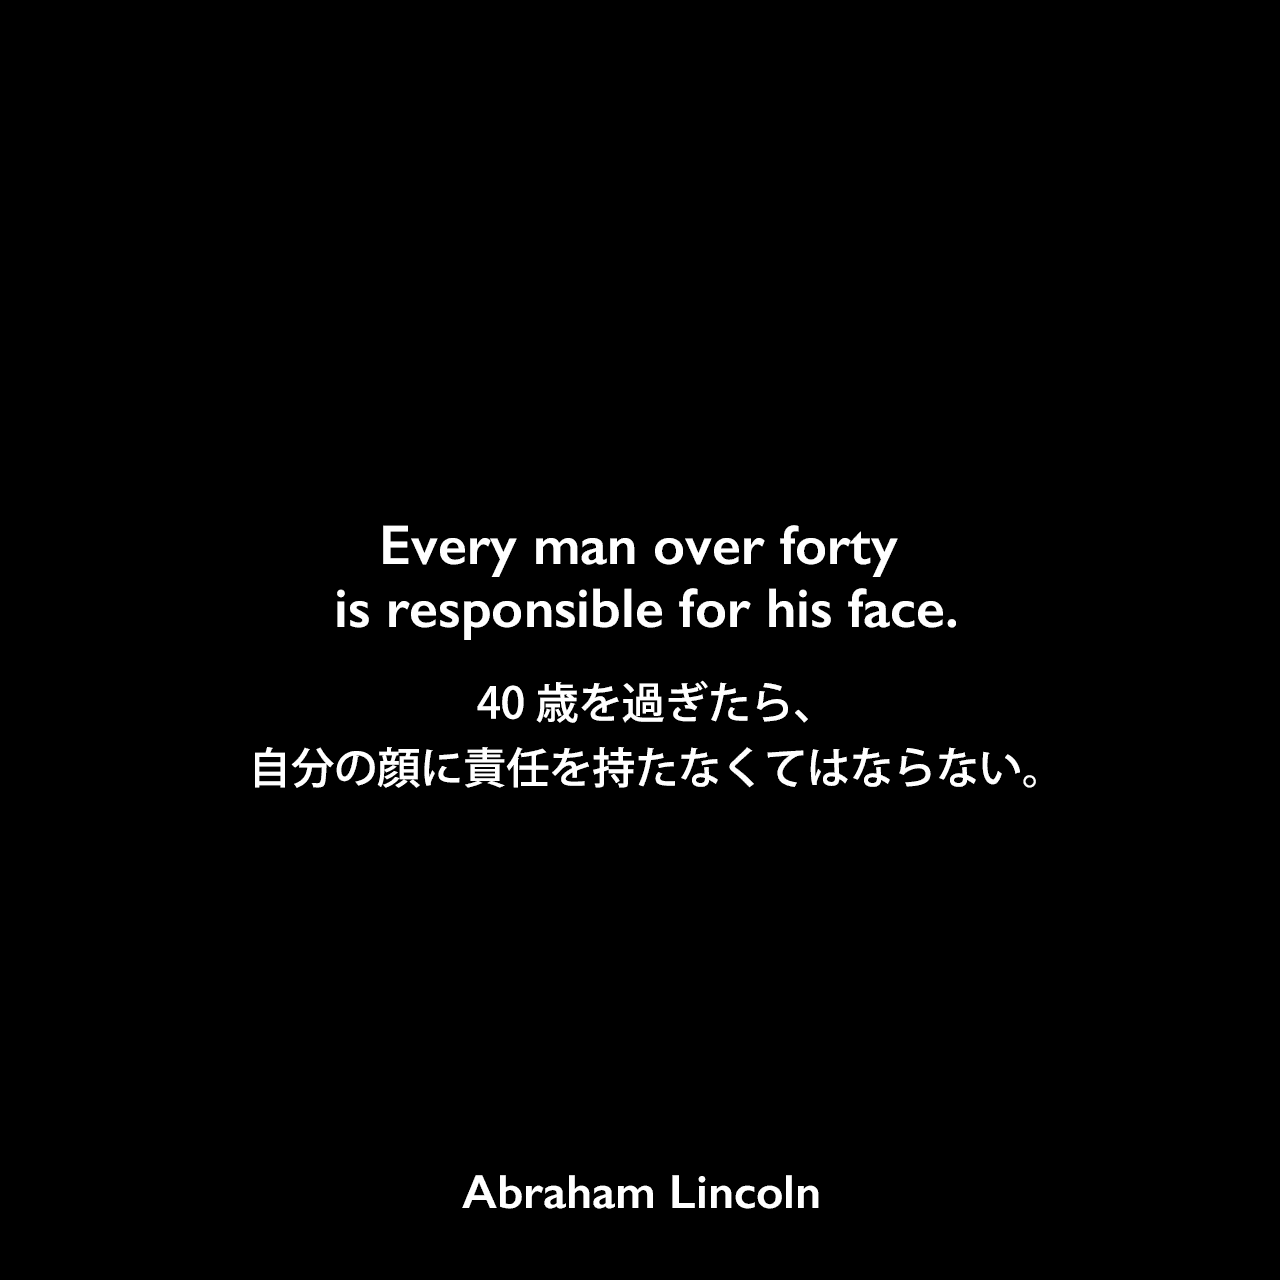 Every man over forty is responsible for his face.40歳を過ぎたら、自分の顔に責任を持たなくてはならない。Abraham Lincoln